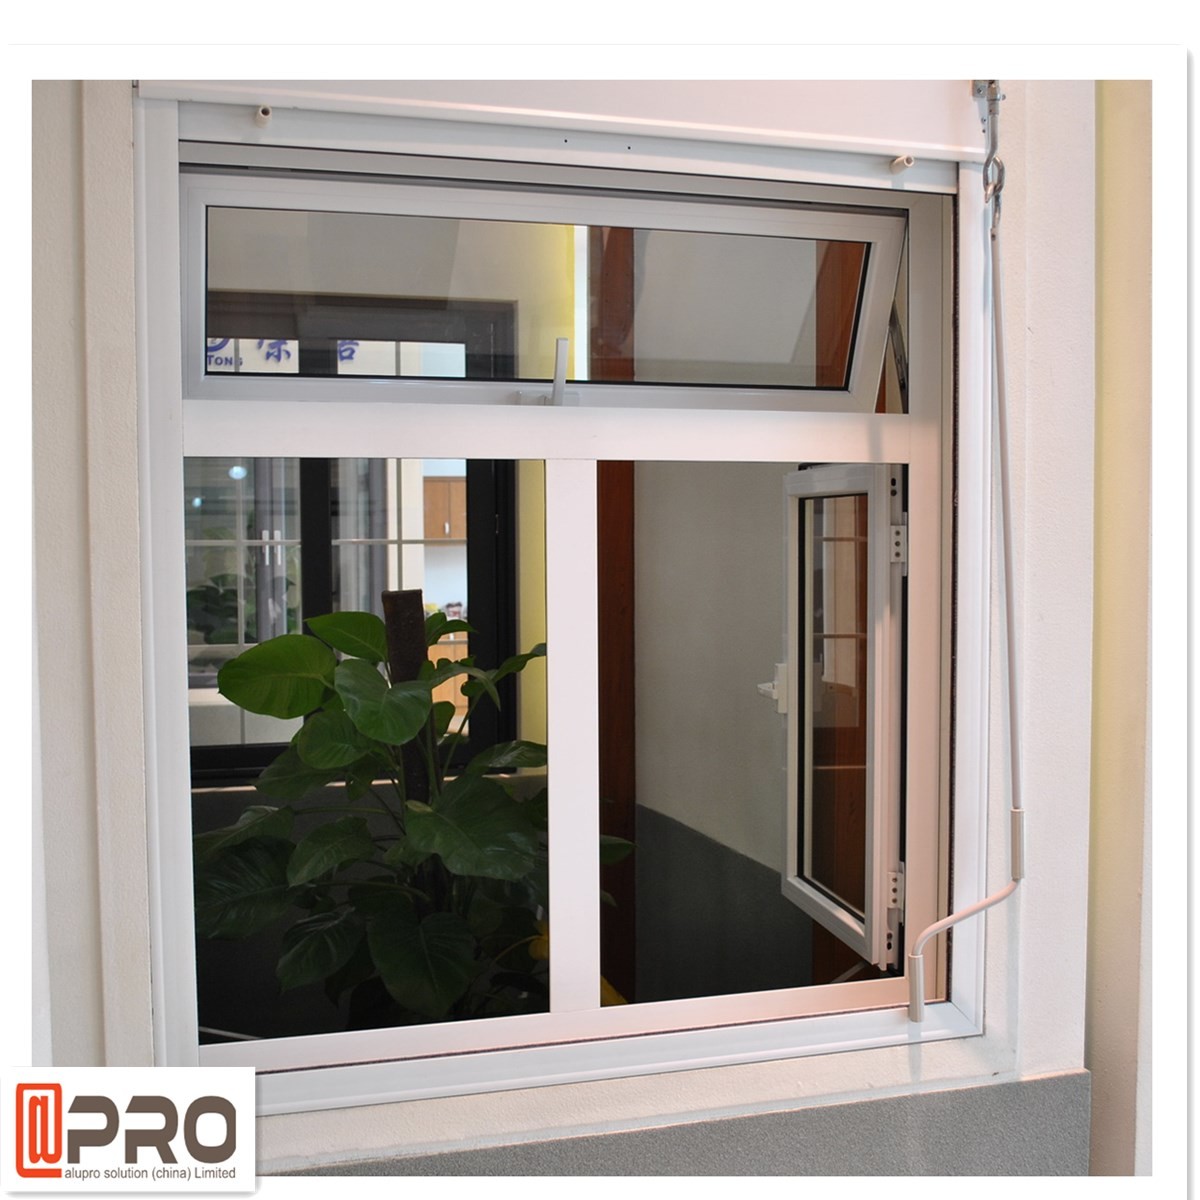 glass awning window,awning window with grill,aluminum awning window parts,awning window price philippines